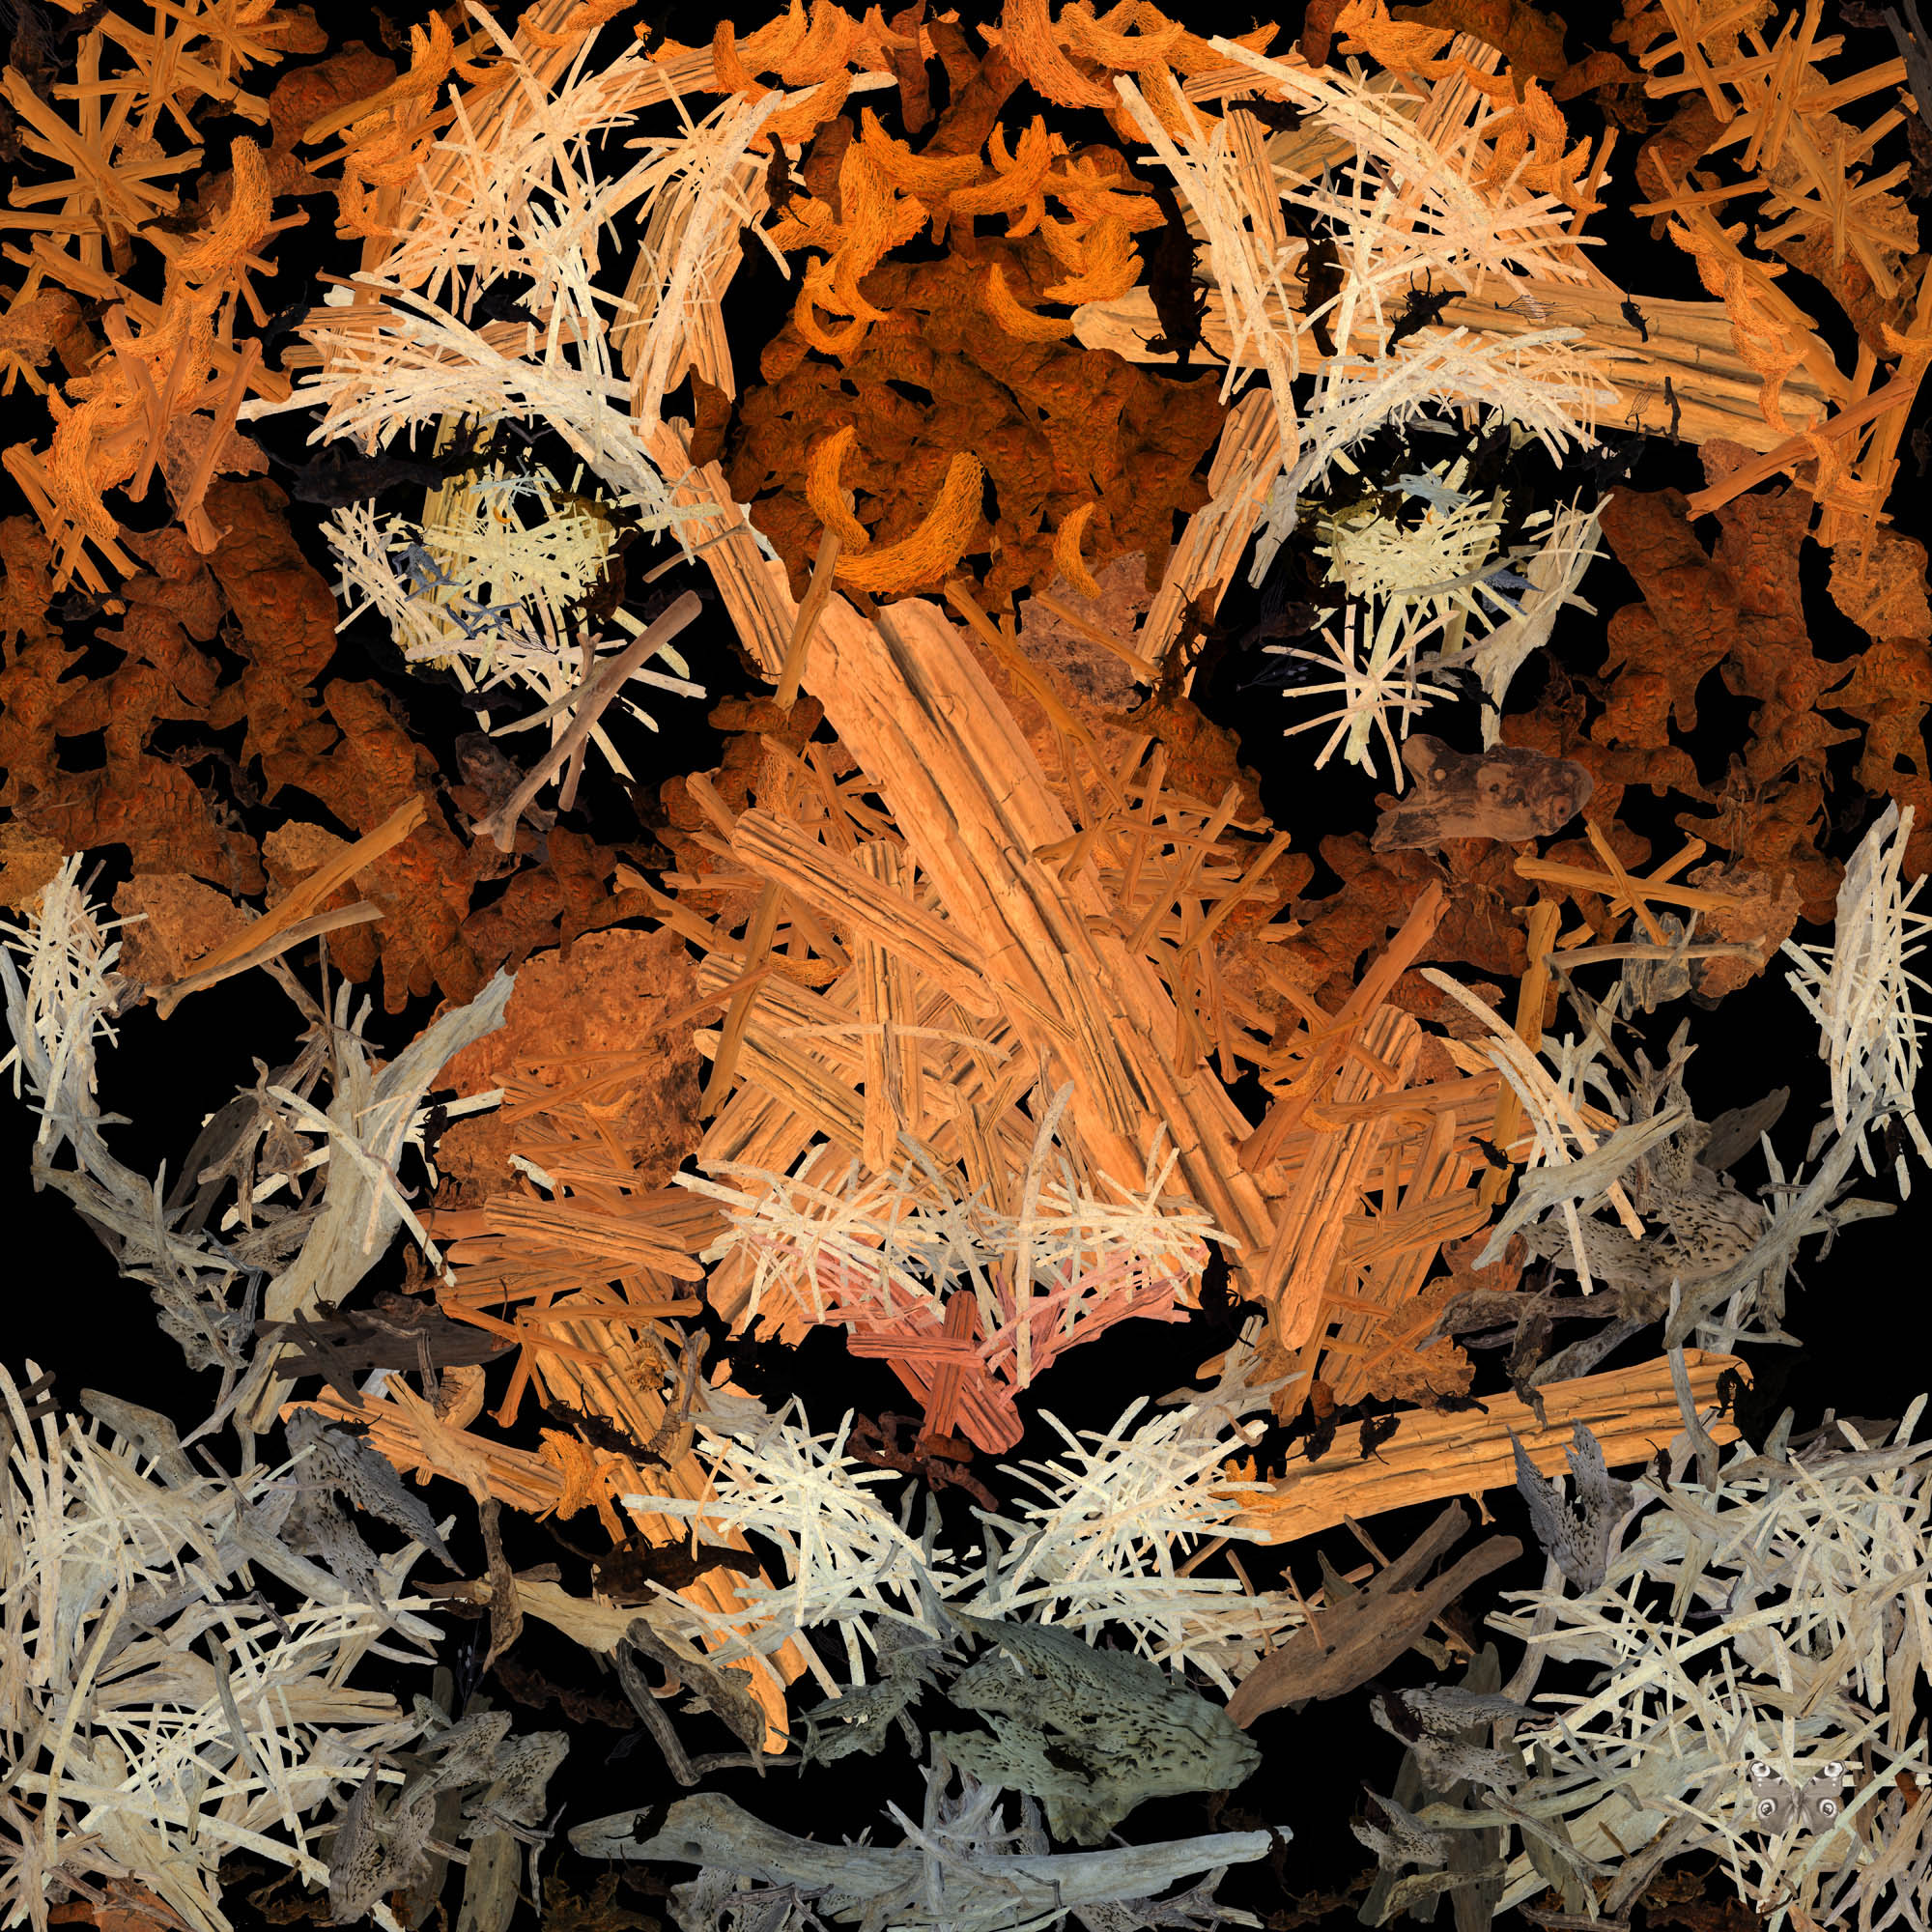 durieuerin tigeroutofwoods1 artnumerique animaux theartcycle photo_principale.jpg The Art Cycle